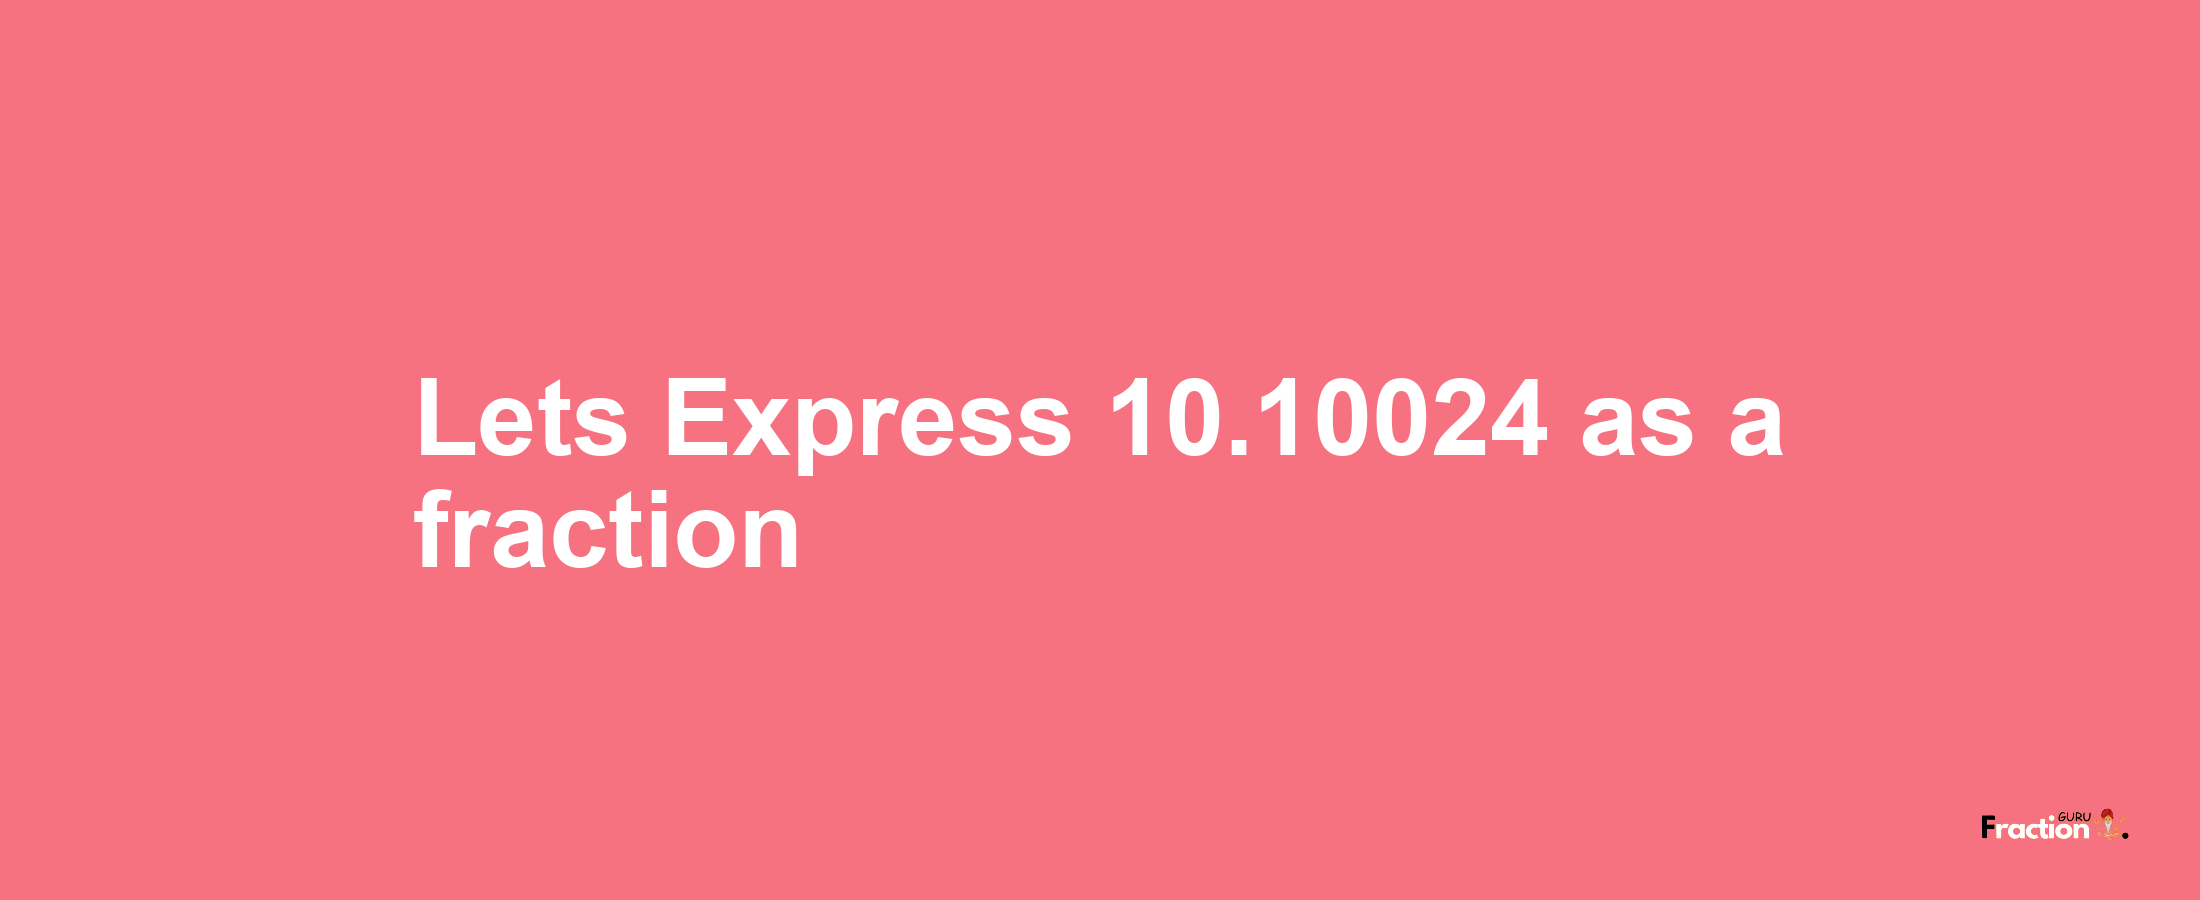 Lets Express 10.10024 as afraction